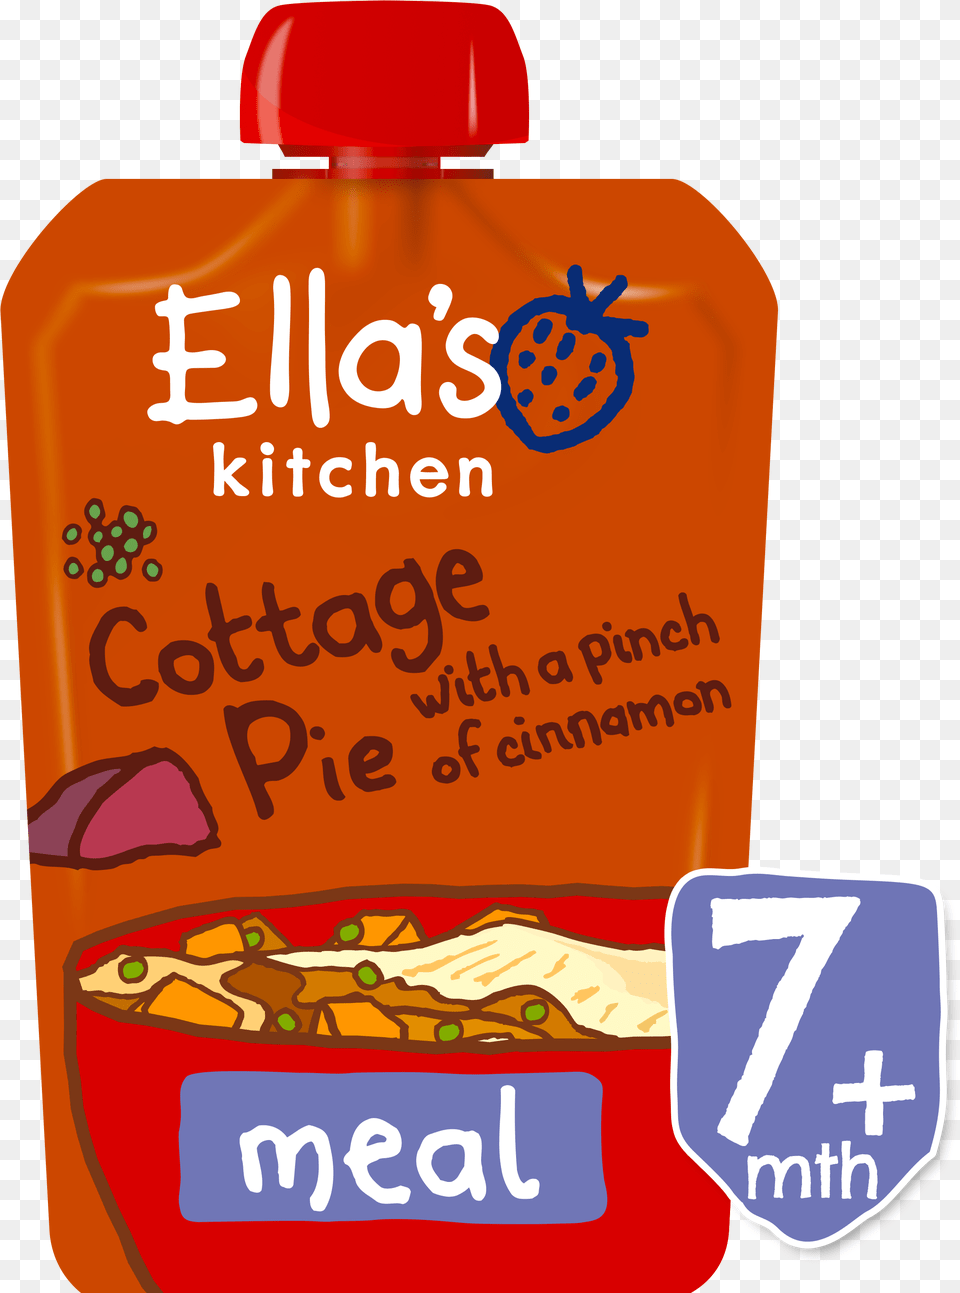 Pouch Cottage Pie Ft Kitchen Cottage Pie, Bottle, Food, Ketchup, Cosmetics Png